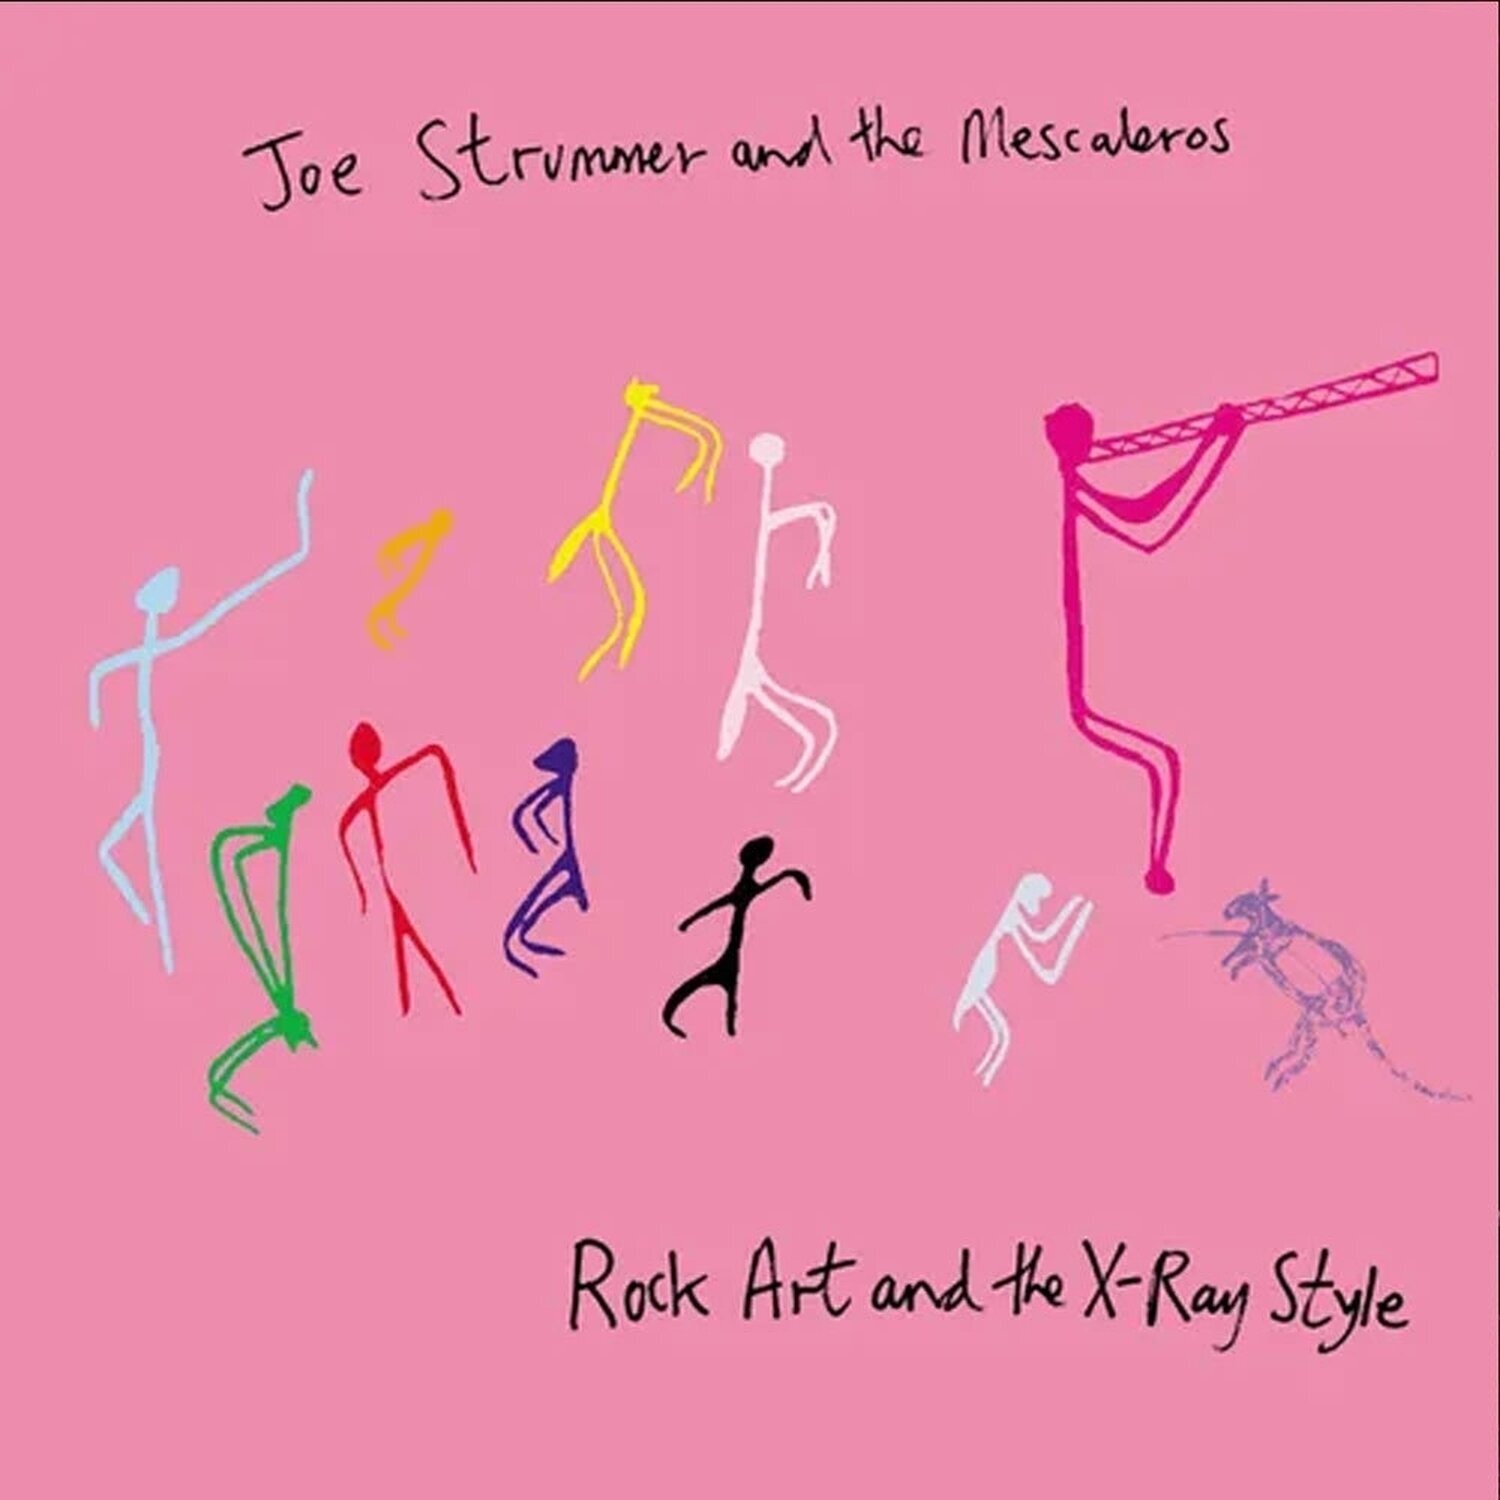 Disco in vinile Joe Strummer & The Mescaleros - Rock Art And The X-Ray Style (Pink Coloured) (Rsd 2024) (2 LP)